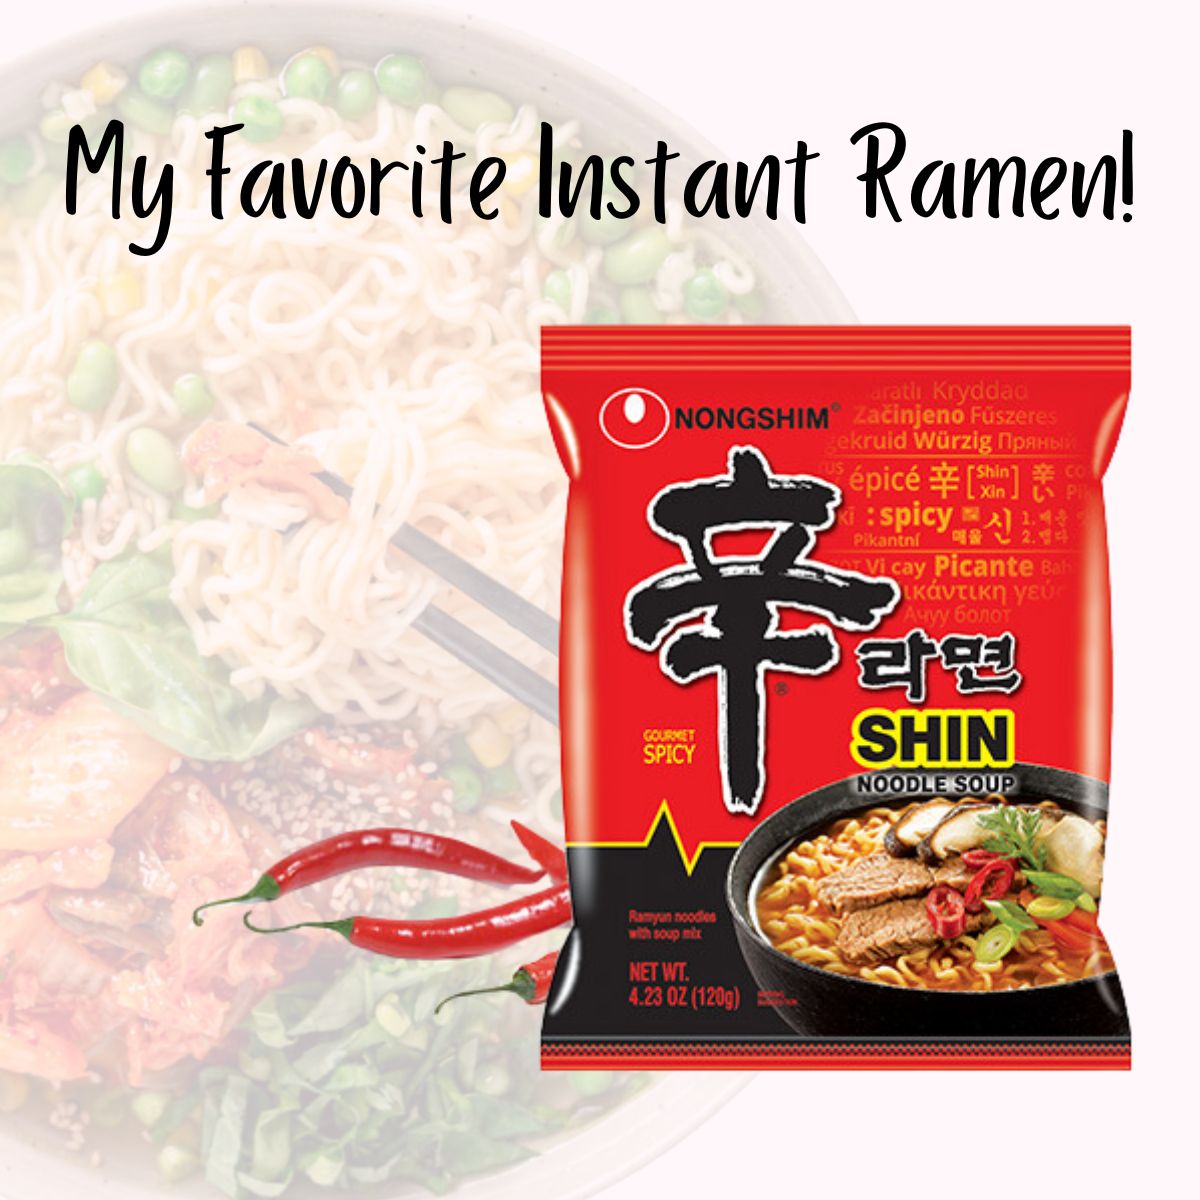 My favorite Instant Ramen with an image of Shin Ramen and transparent ramen noodles in the background